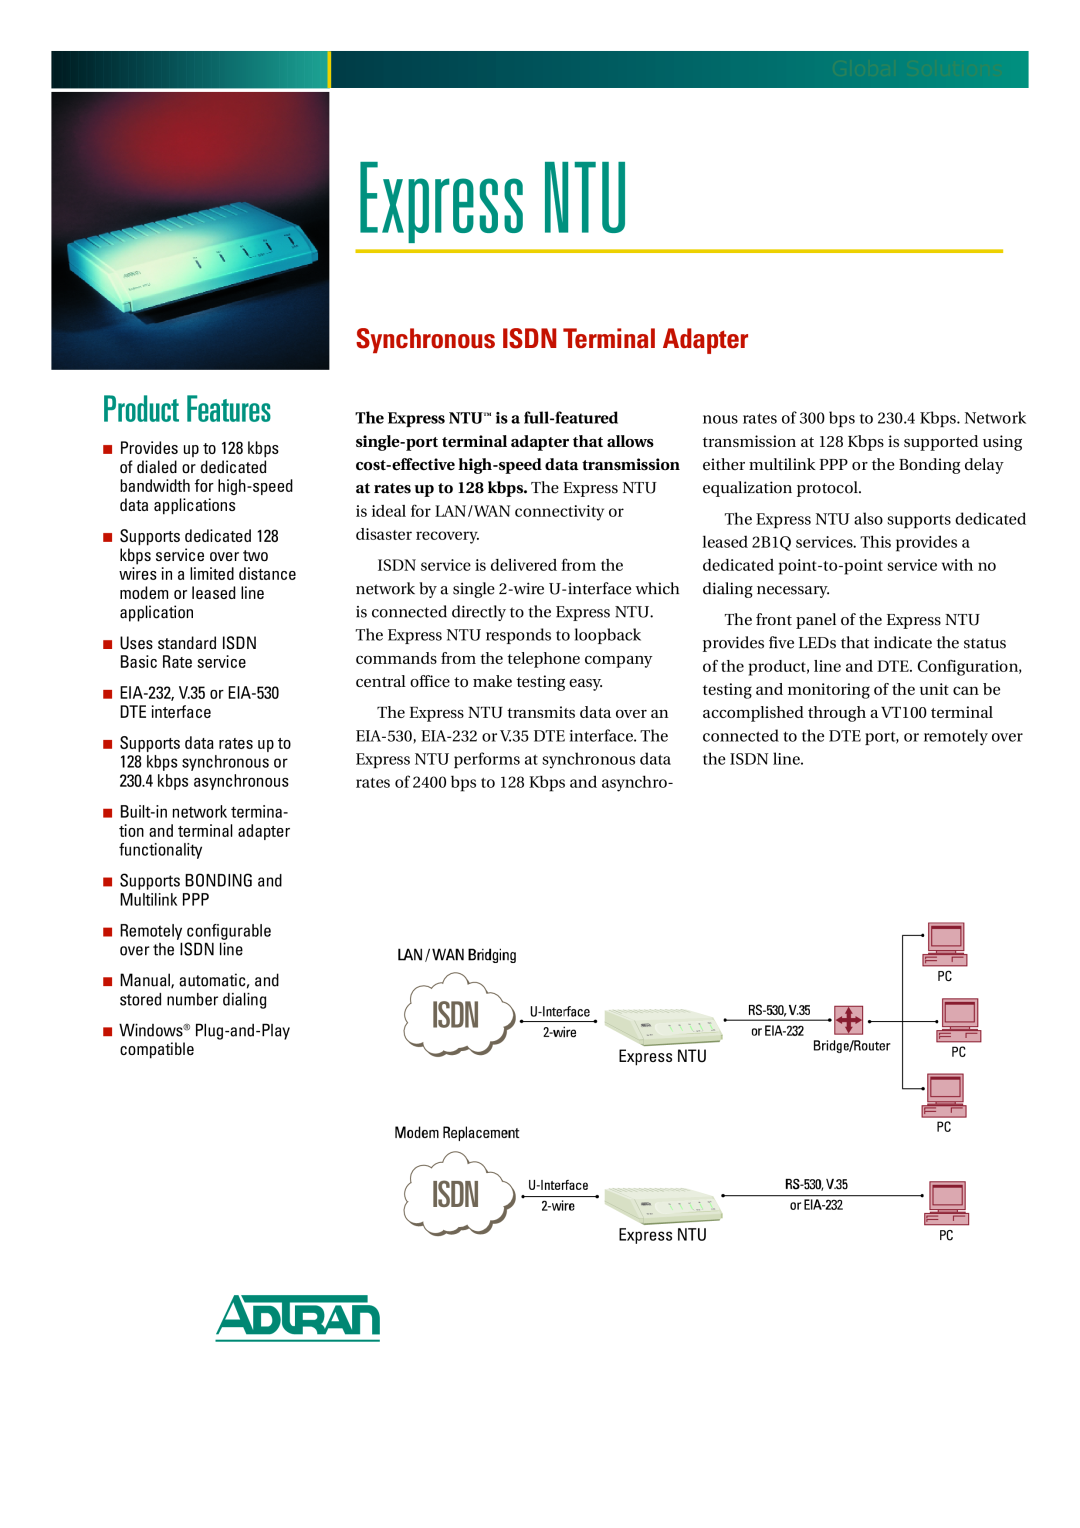 ADTRAN manual Express NTU, Isdn, Product Features, Synchronous ISDN Terminal Adapter, Global Solutions 